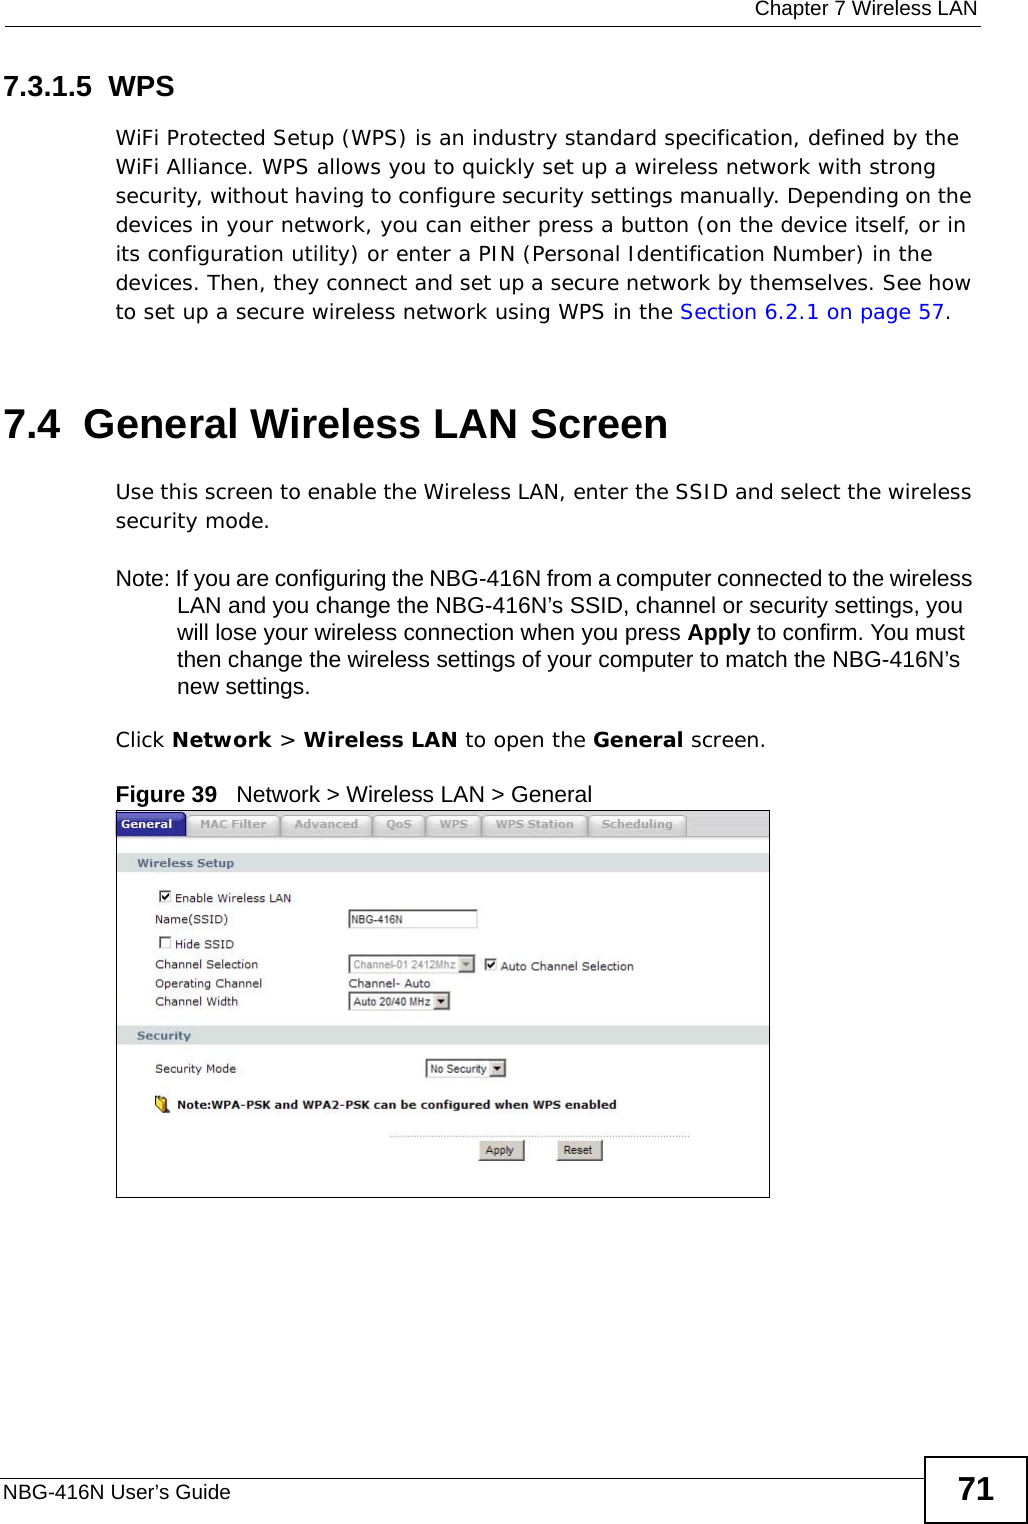  Chapter 7 Wireless LANNBG-416N User’s Guide 717.3.1.5  WPSWiFi Protected Setup (WPS) is an industry standard specification, defined by the WiFi Alliance. WPS allows you to quickly set up a wireless network with strong security, without having to configure security settings manually. Depending on the devices in your network, you can either press a button (on the device itself, or in its configuration utility) or enter a PIN (Personal Identification Number) in the devices. Then, they connect and set up a secure network by themselves. See how to set up a secure wireless network using WPS in the Section 6.2.1 on page 57. 7.4  General Wireless LAN Screen Use this screen to enable the Wireless LAN, enter the SSID and select the wireless security mode.Note: If you are configuring the NBG-416N from a computer connected to the wireless LAN and you change the NBG-416N’s SSID, channel or security settings, you will lose your wireless connection when you press Apply to confirm. You must then change the wireless settings of your computer to match the NBG-416N’s new settings.Click Network &gt; Wireless LAN to open the General screen.Figure 39   Network &gt; Wireless LAN &gt; General 